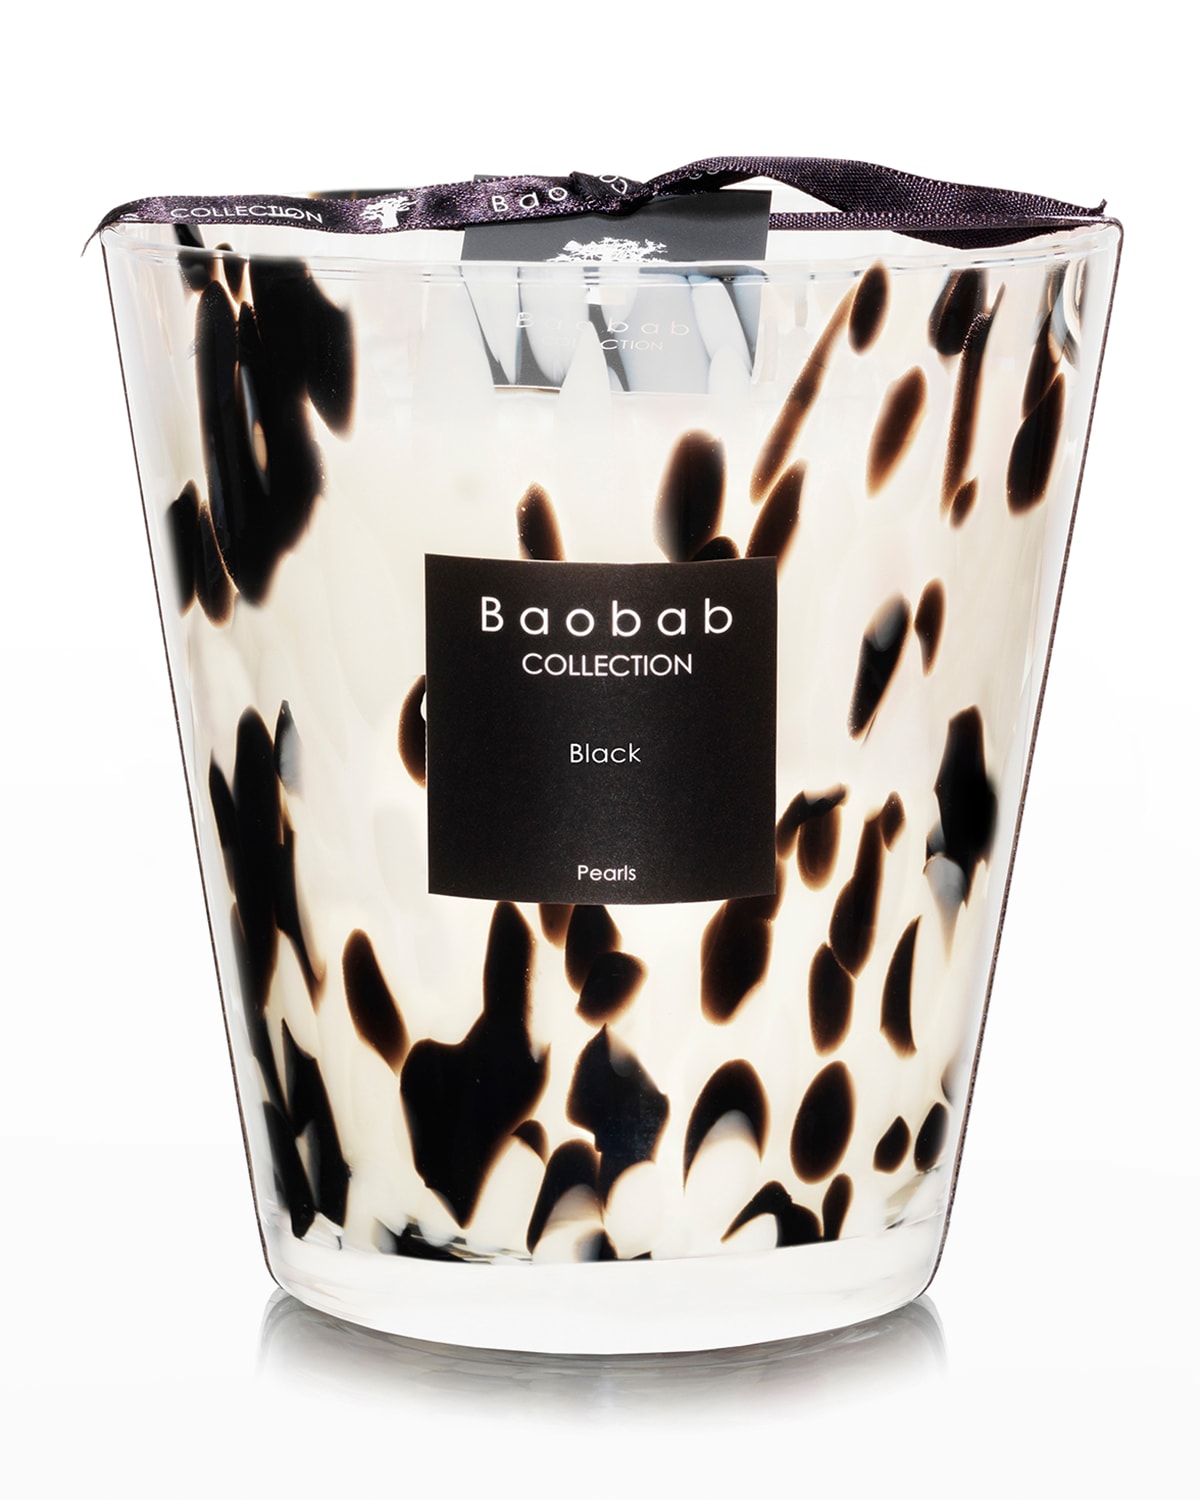 Baobab Collection Black Pearls Scented Candle, 6.3" In Black/white